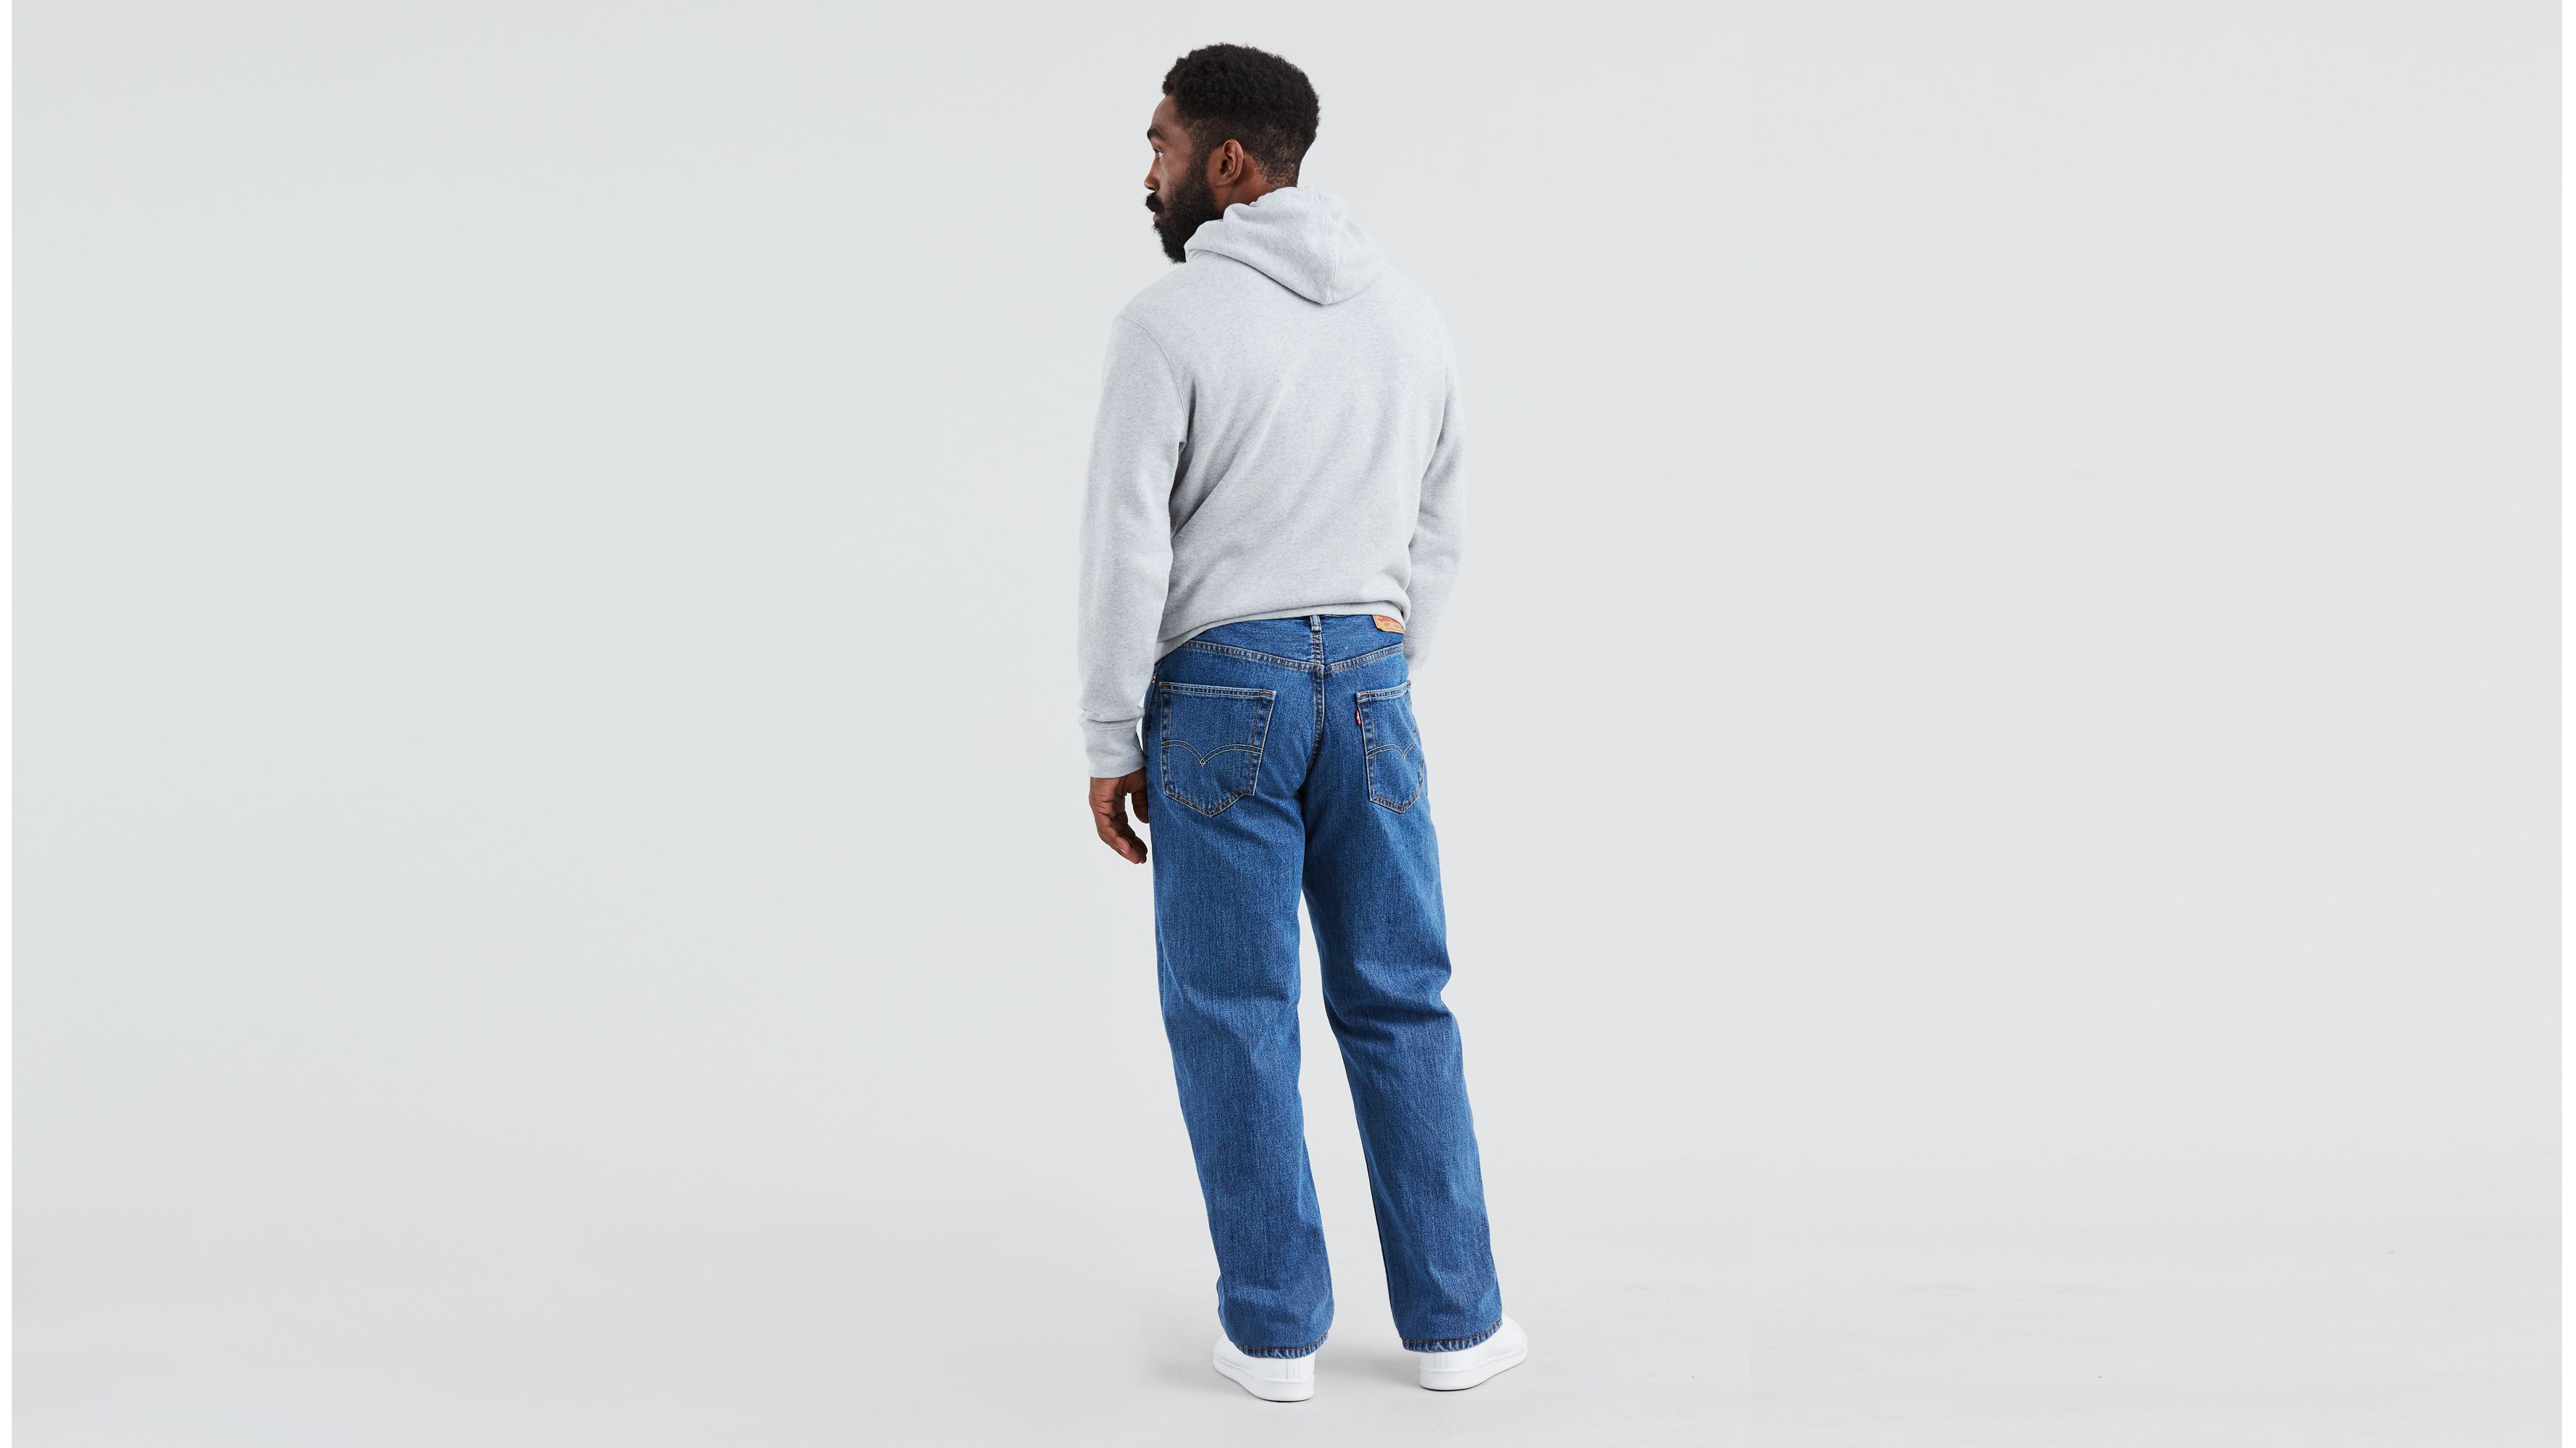 levi strauss 550 jeans relaxed fit